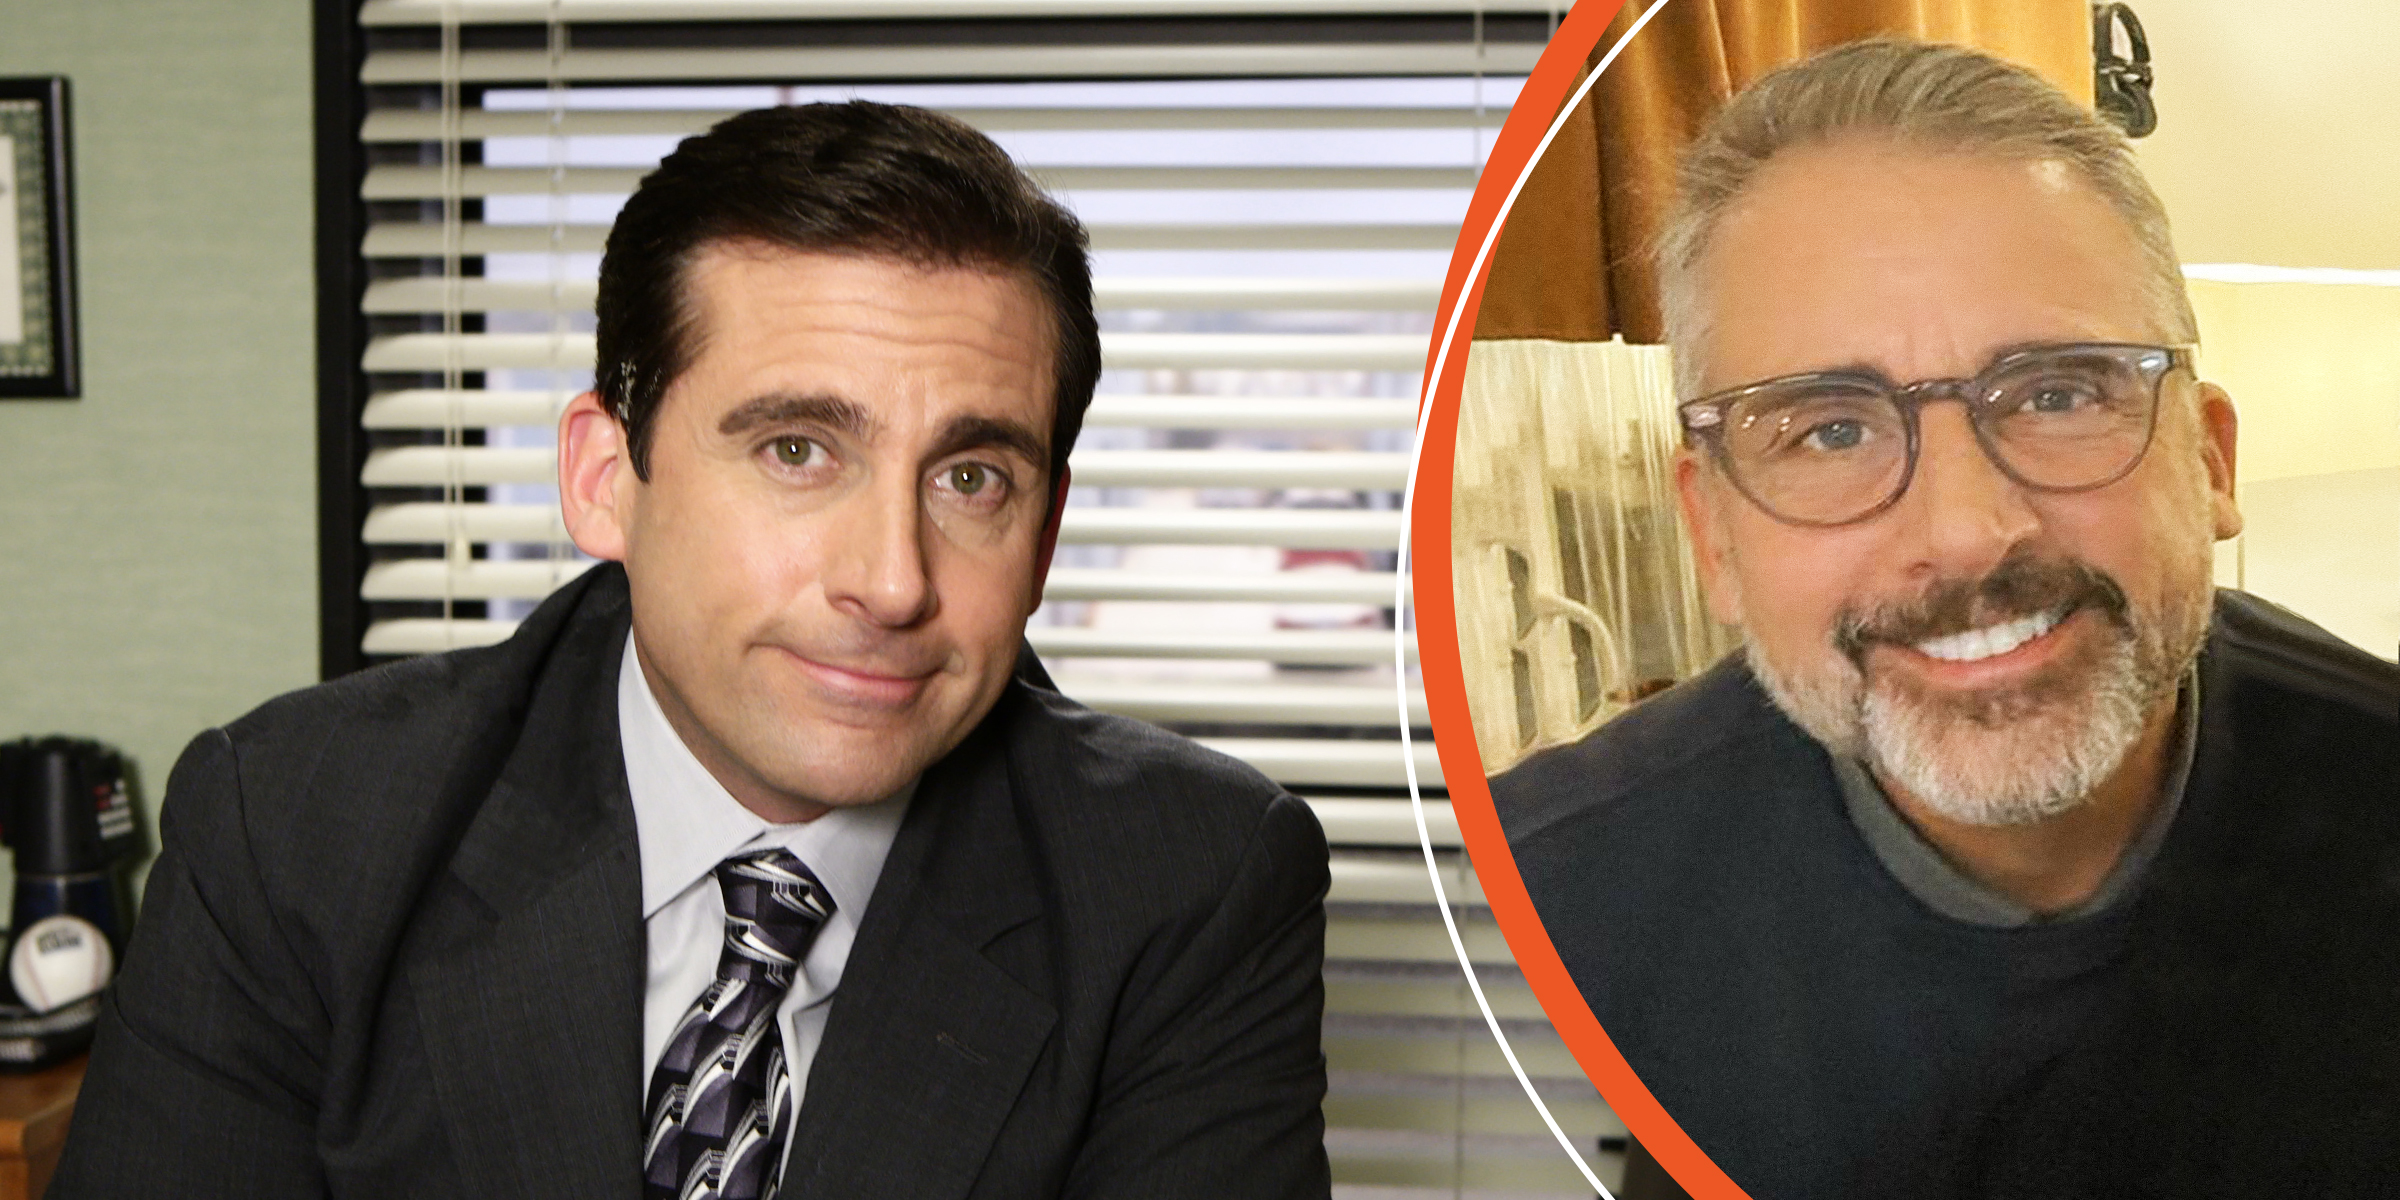 Steve Carell on the set of "The Office" in 2008. | Steve Carell in 2023. | Source: Getty Images | instagram.com/msjennafischer